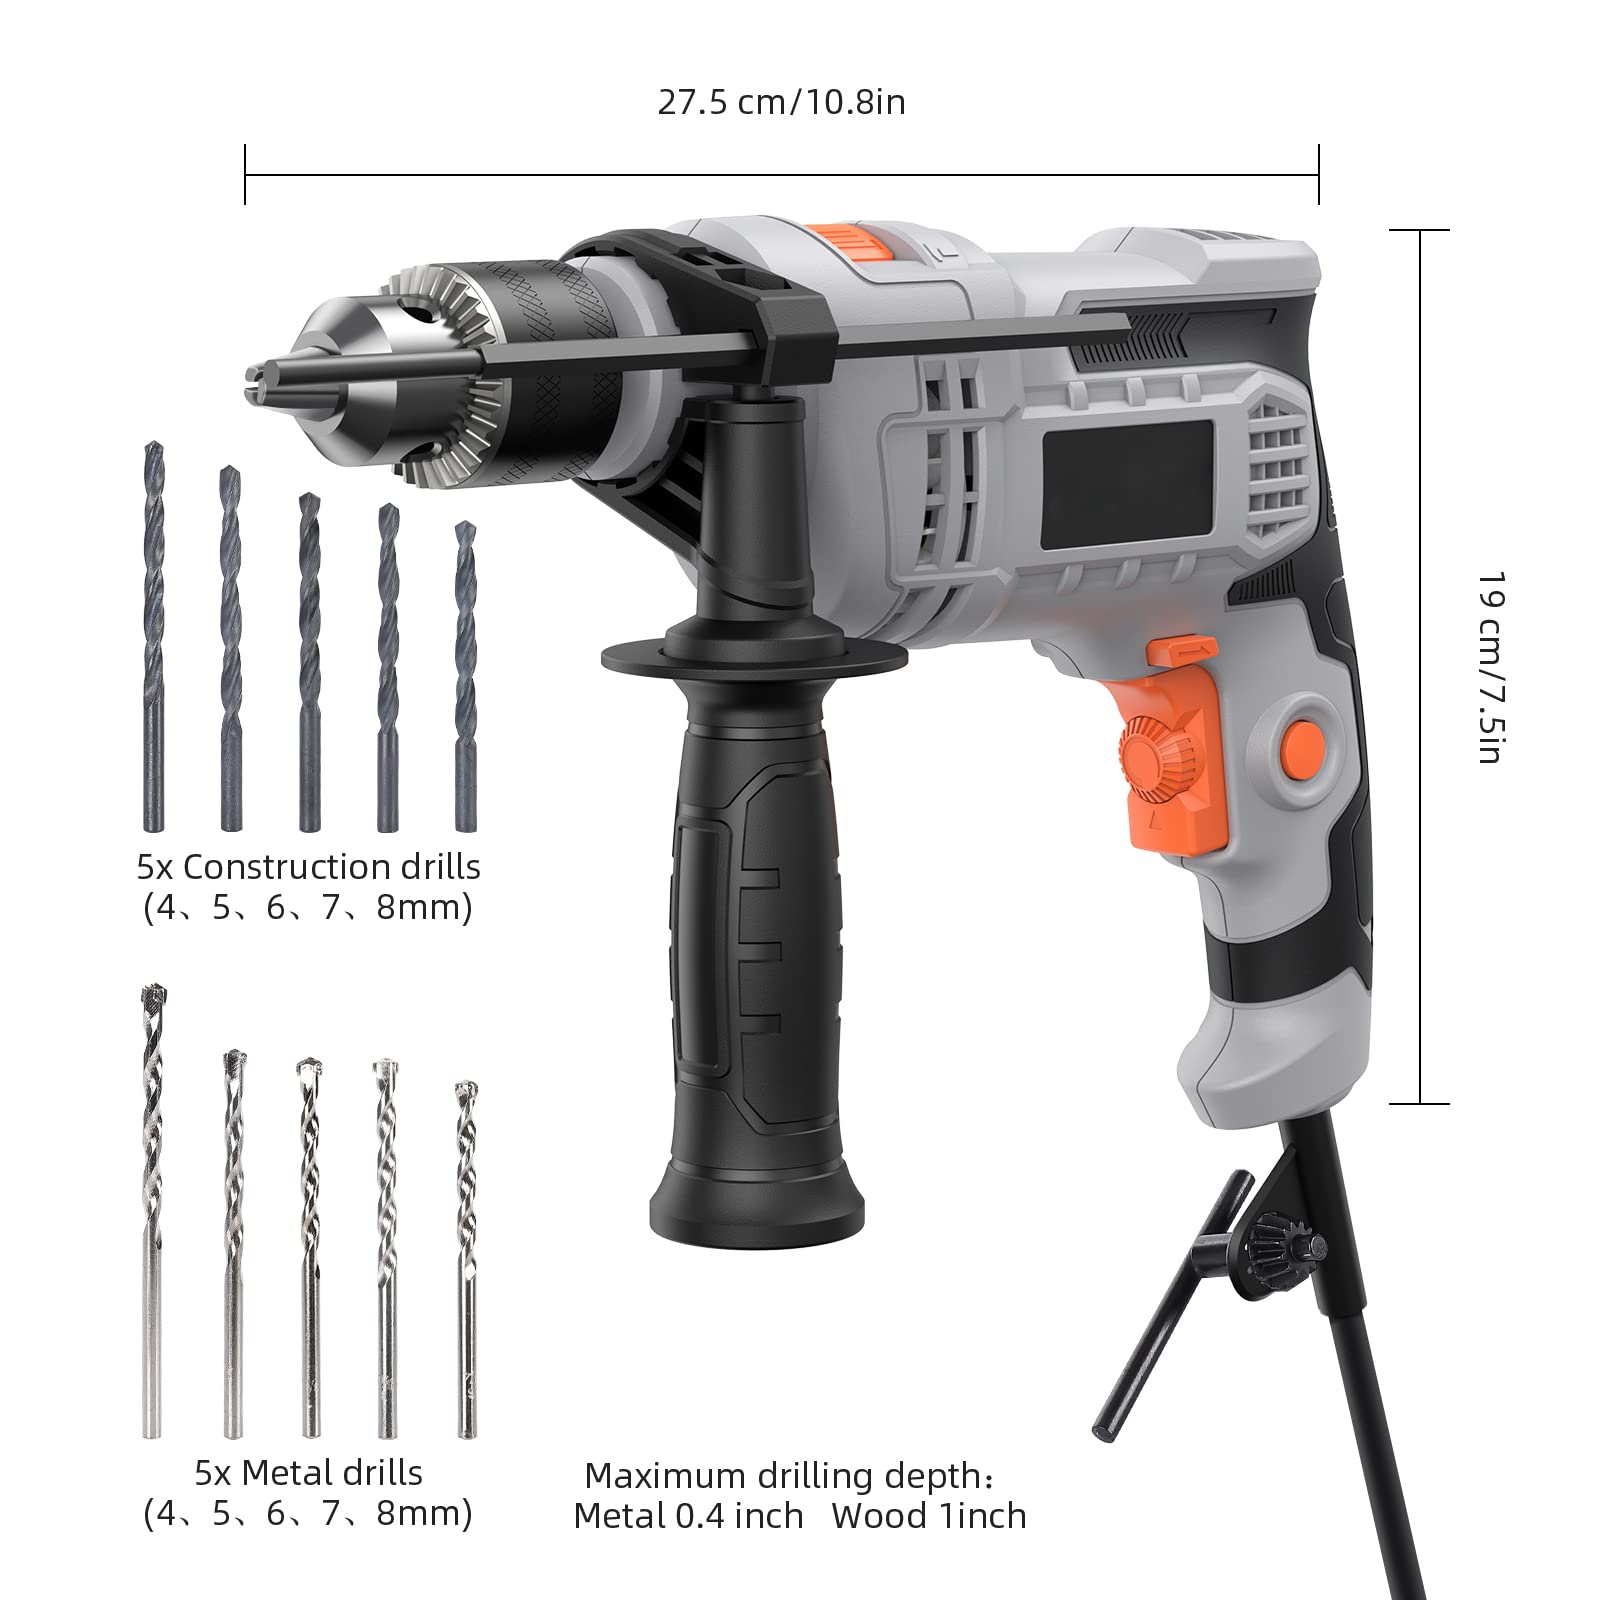 7-Amp Hammer Drill, PioneerWorks 1/2-Inch Electric Hammer Drill with 3000RPM, Variable Speed, 10 Drill Bits for Home Improvement, DIY, Masonry, Wood